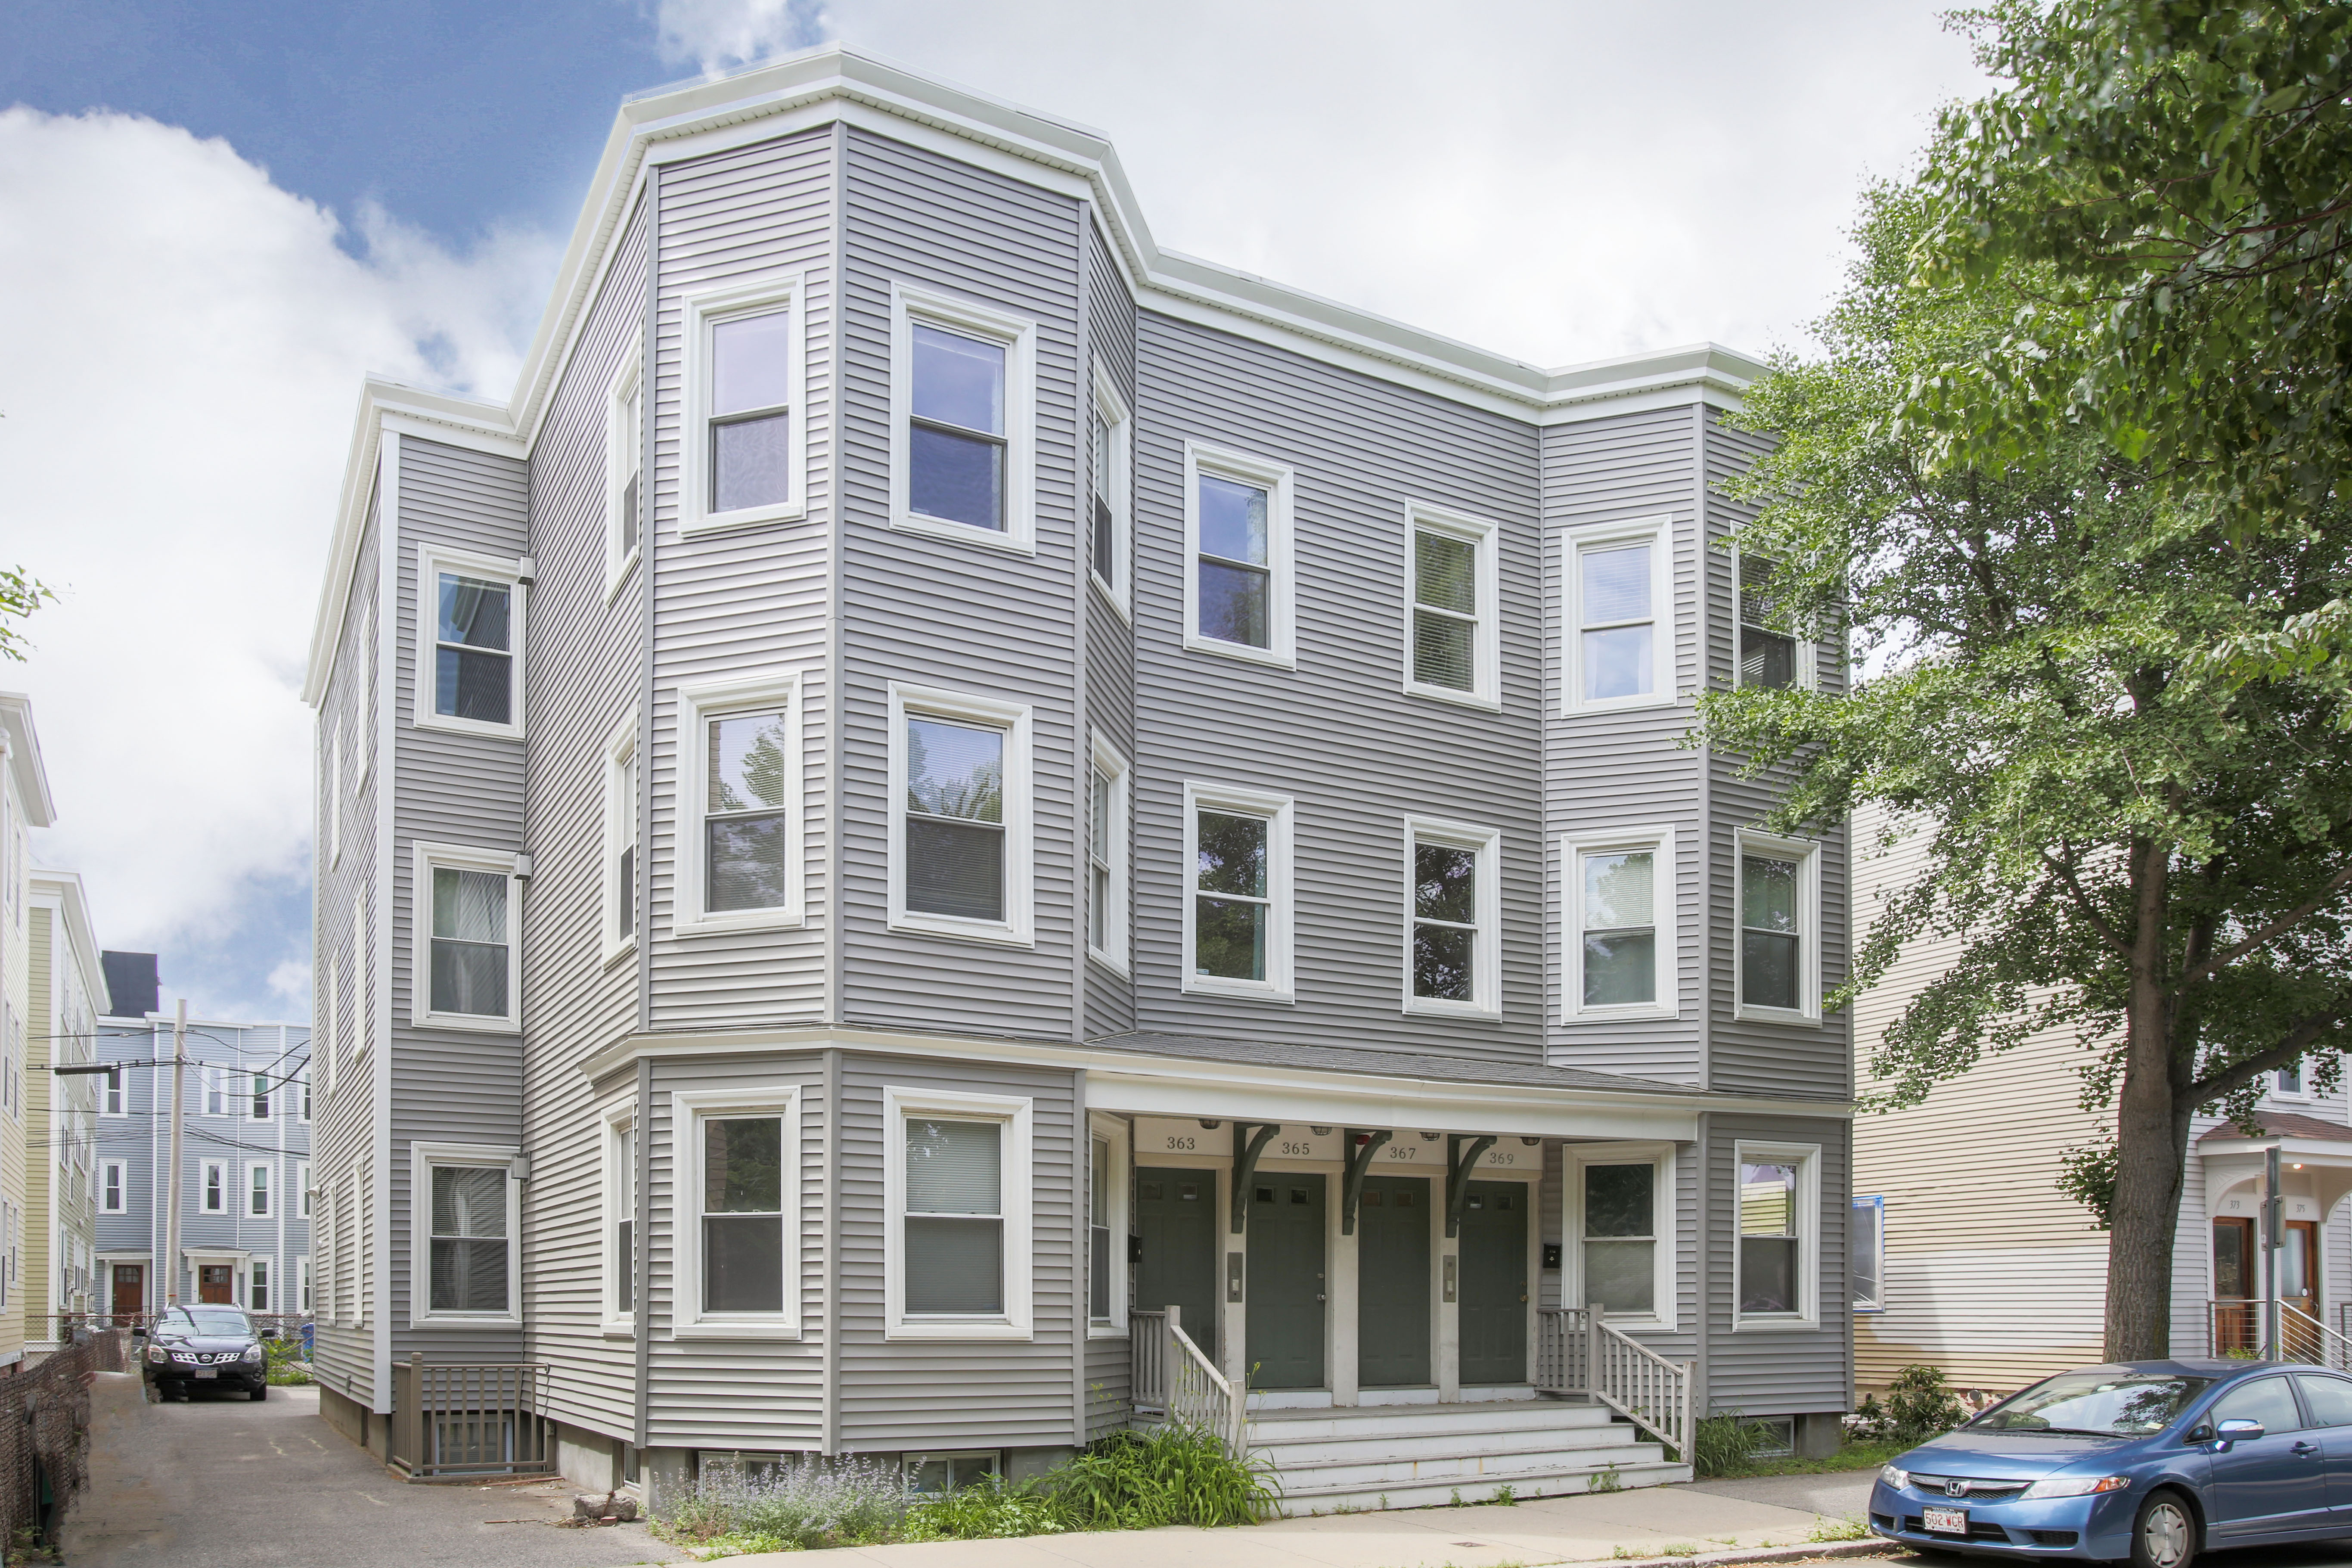 [JUST LISTED] Spacious & Bright 2 Bedroom in East Cambridge